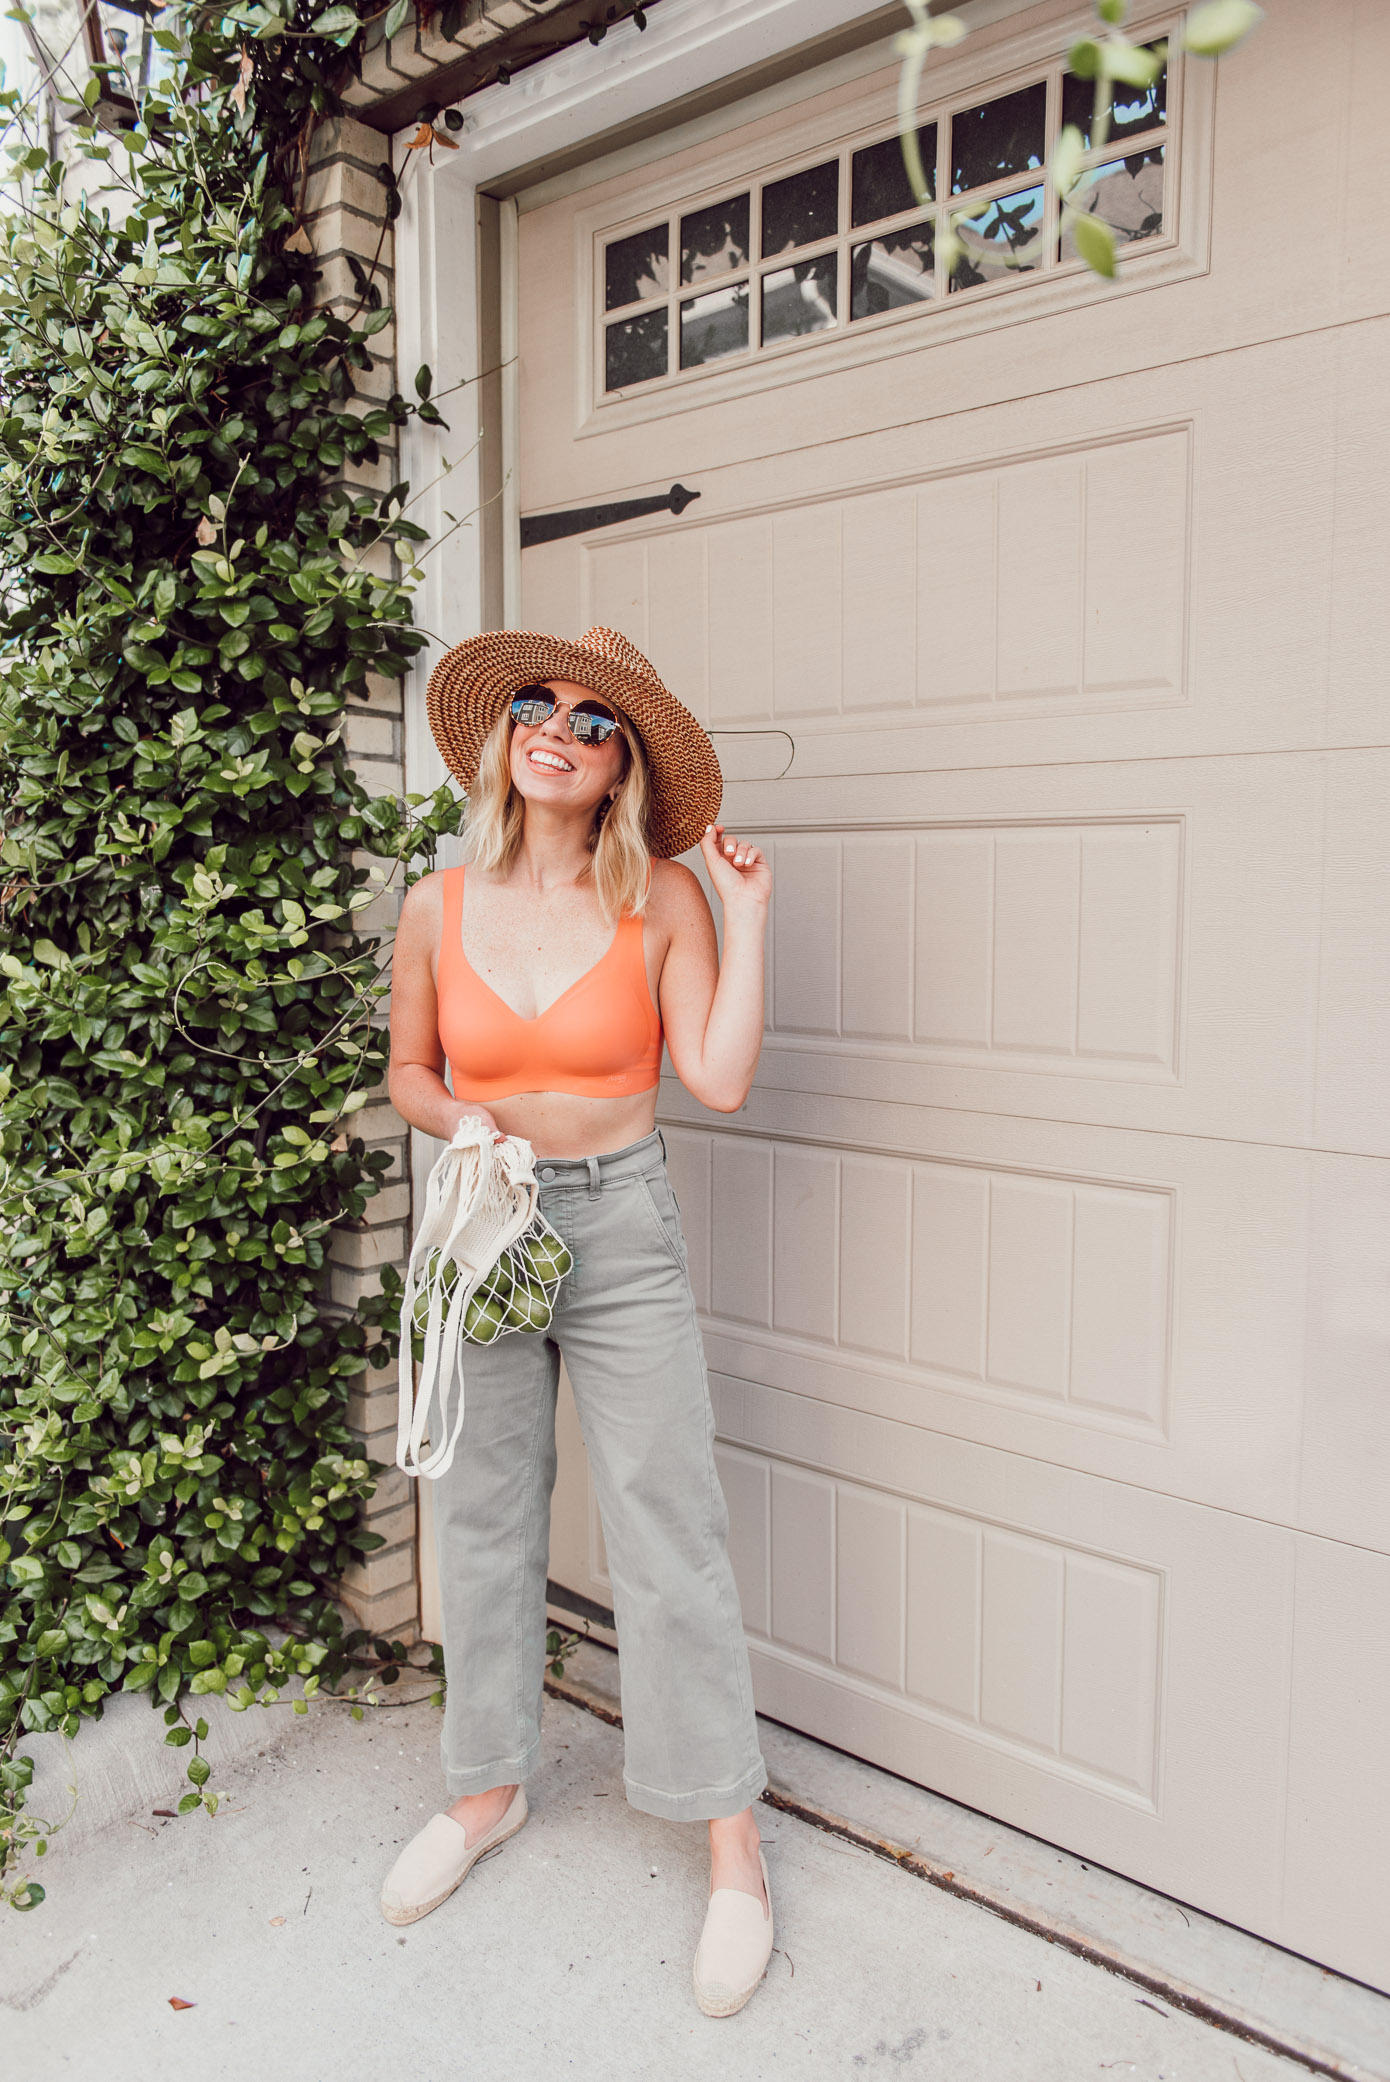 The Comfiest Bralette for Everyday Wear | How to Style Bralette for Summer | Louella Reese